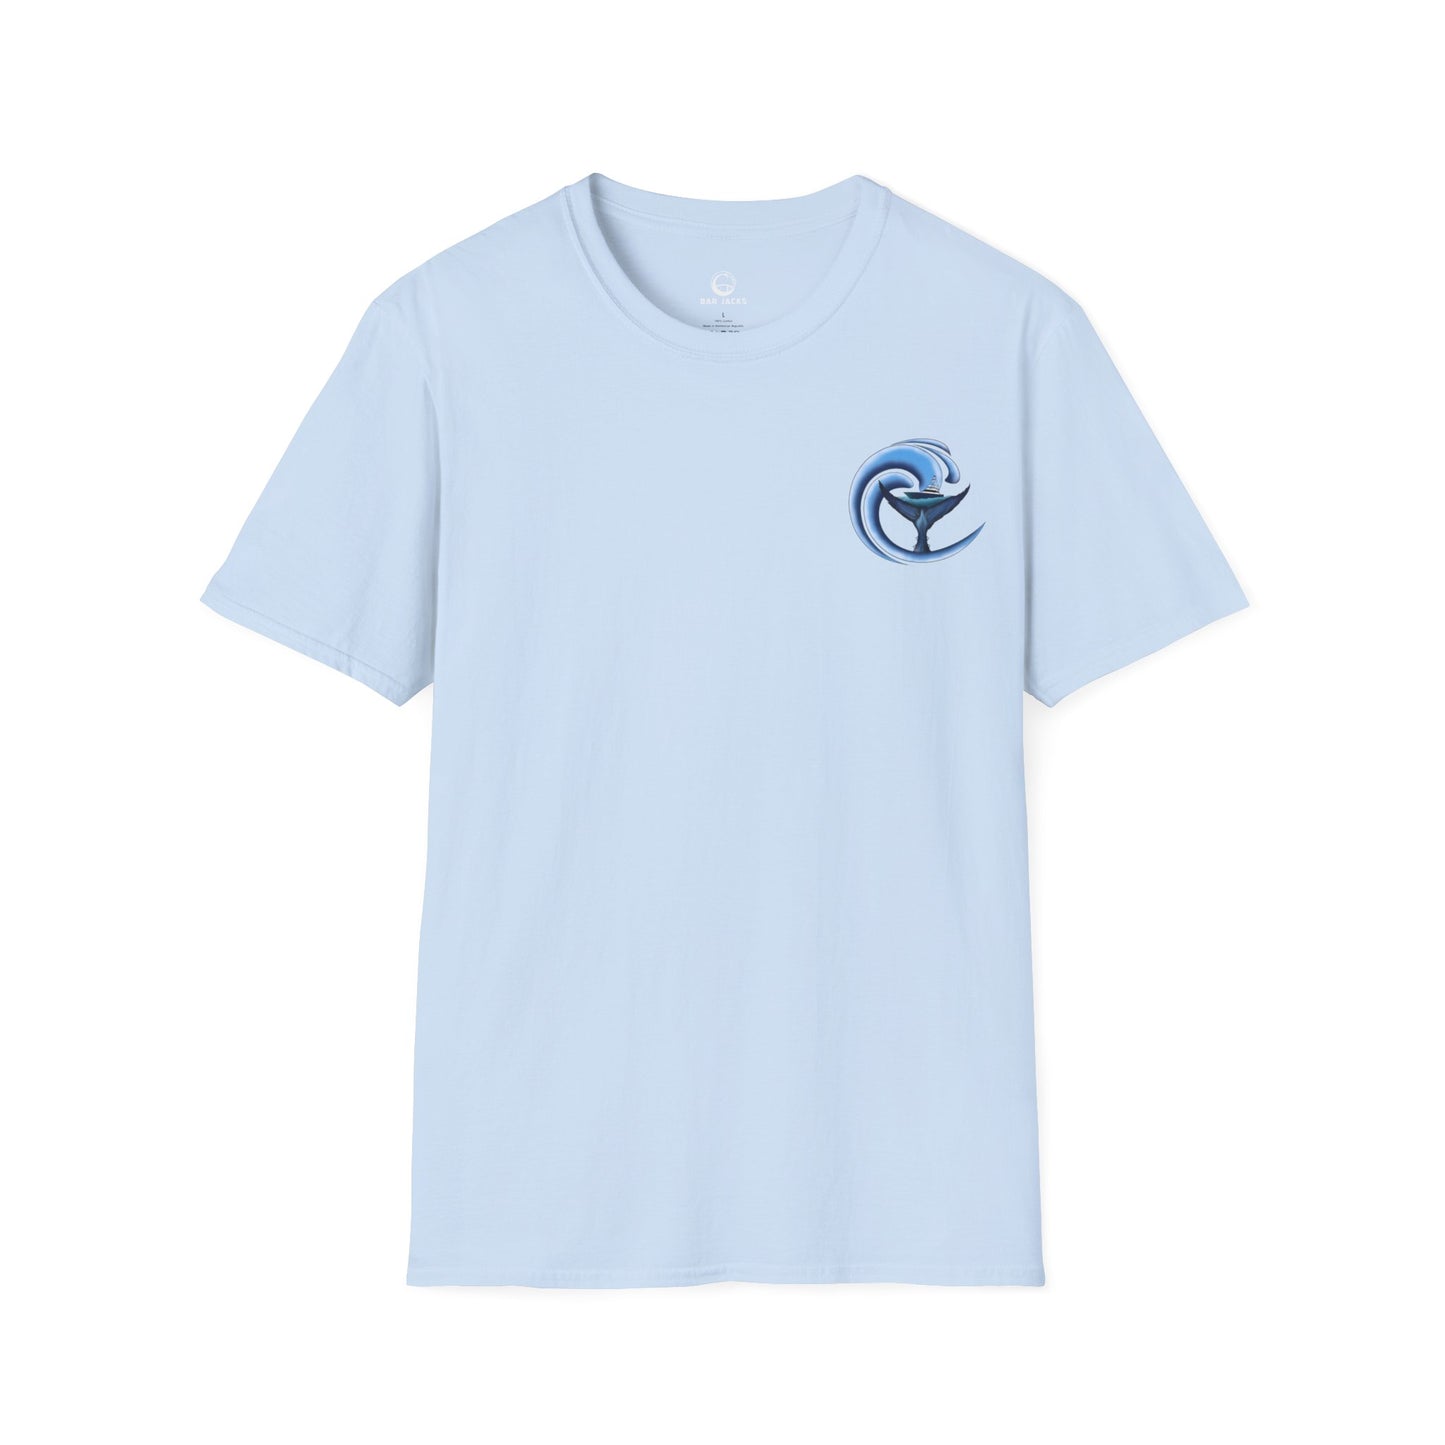 Tails Up Offshore T-Shirt